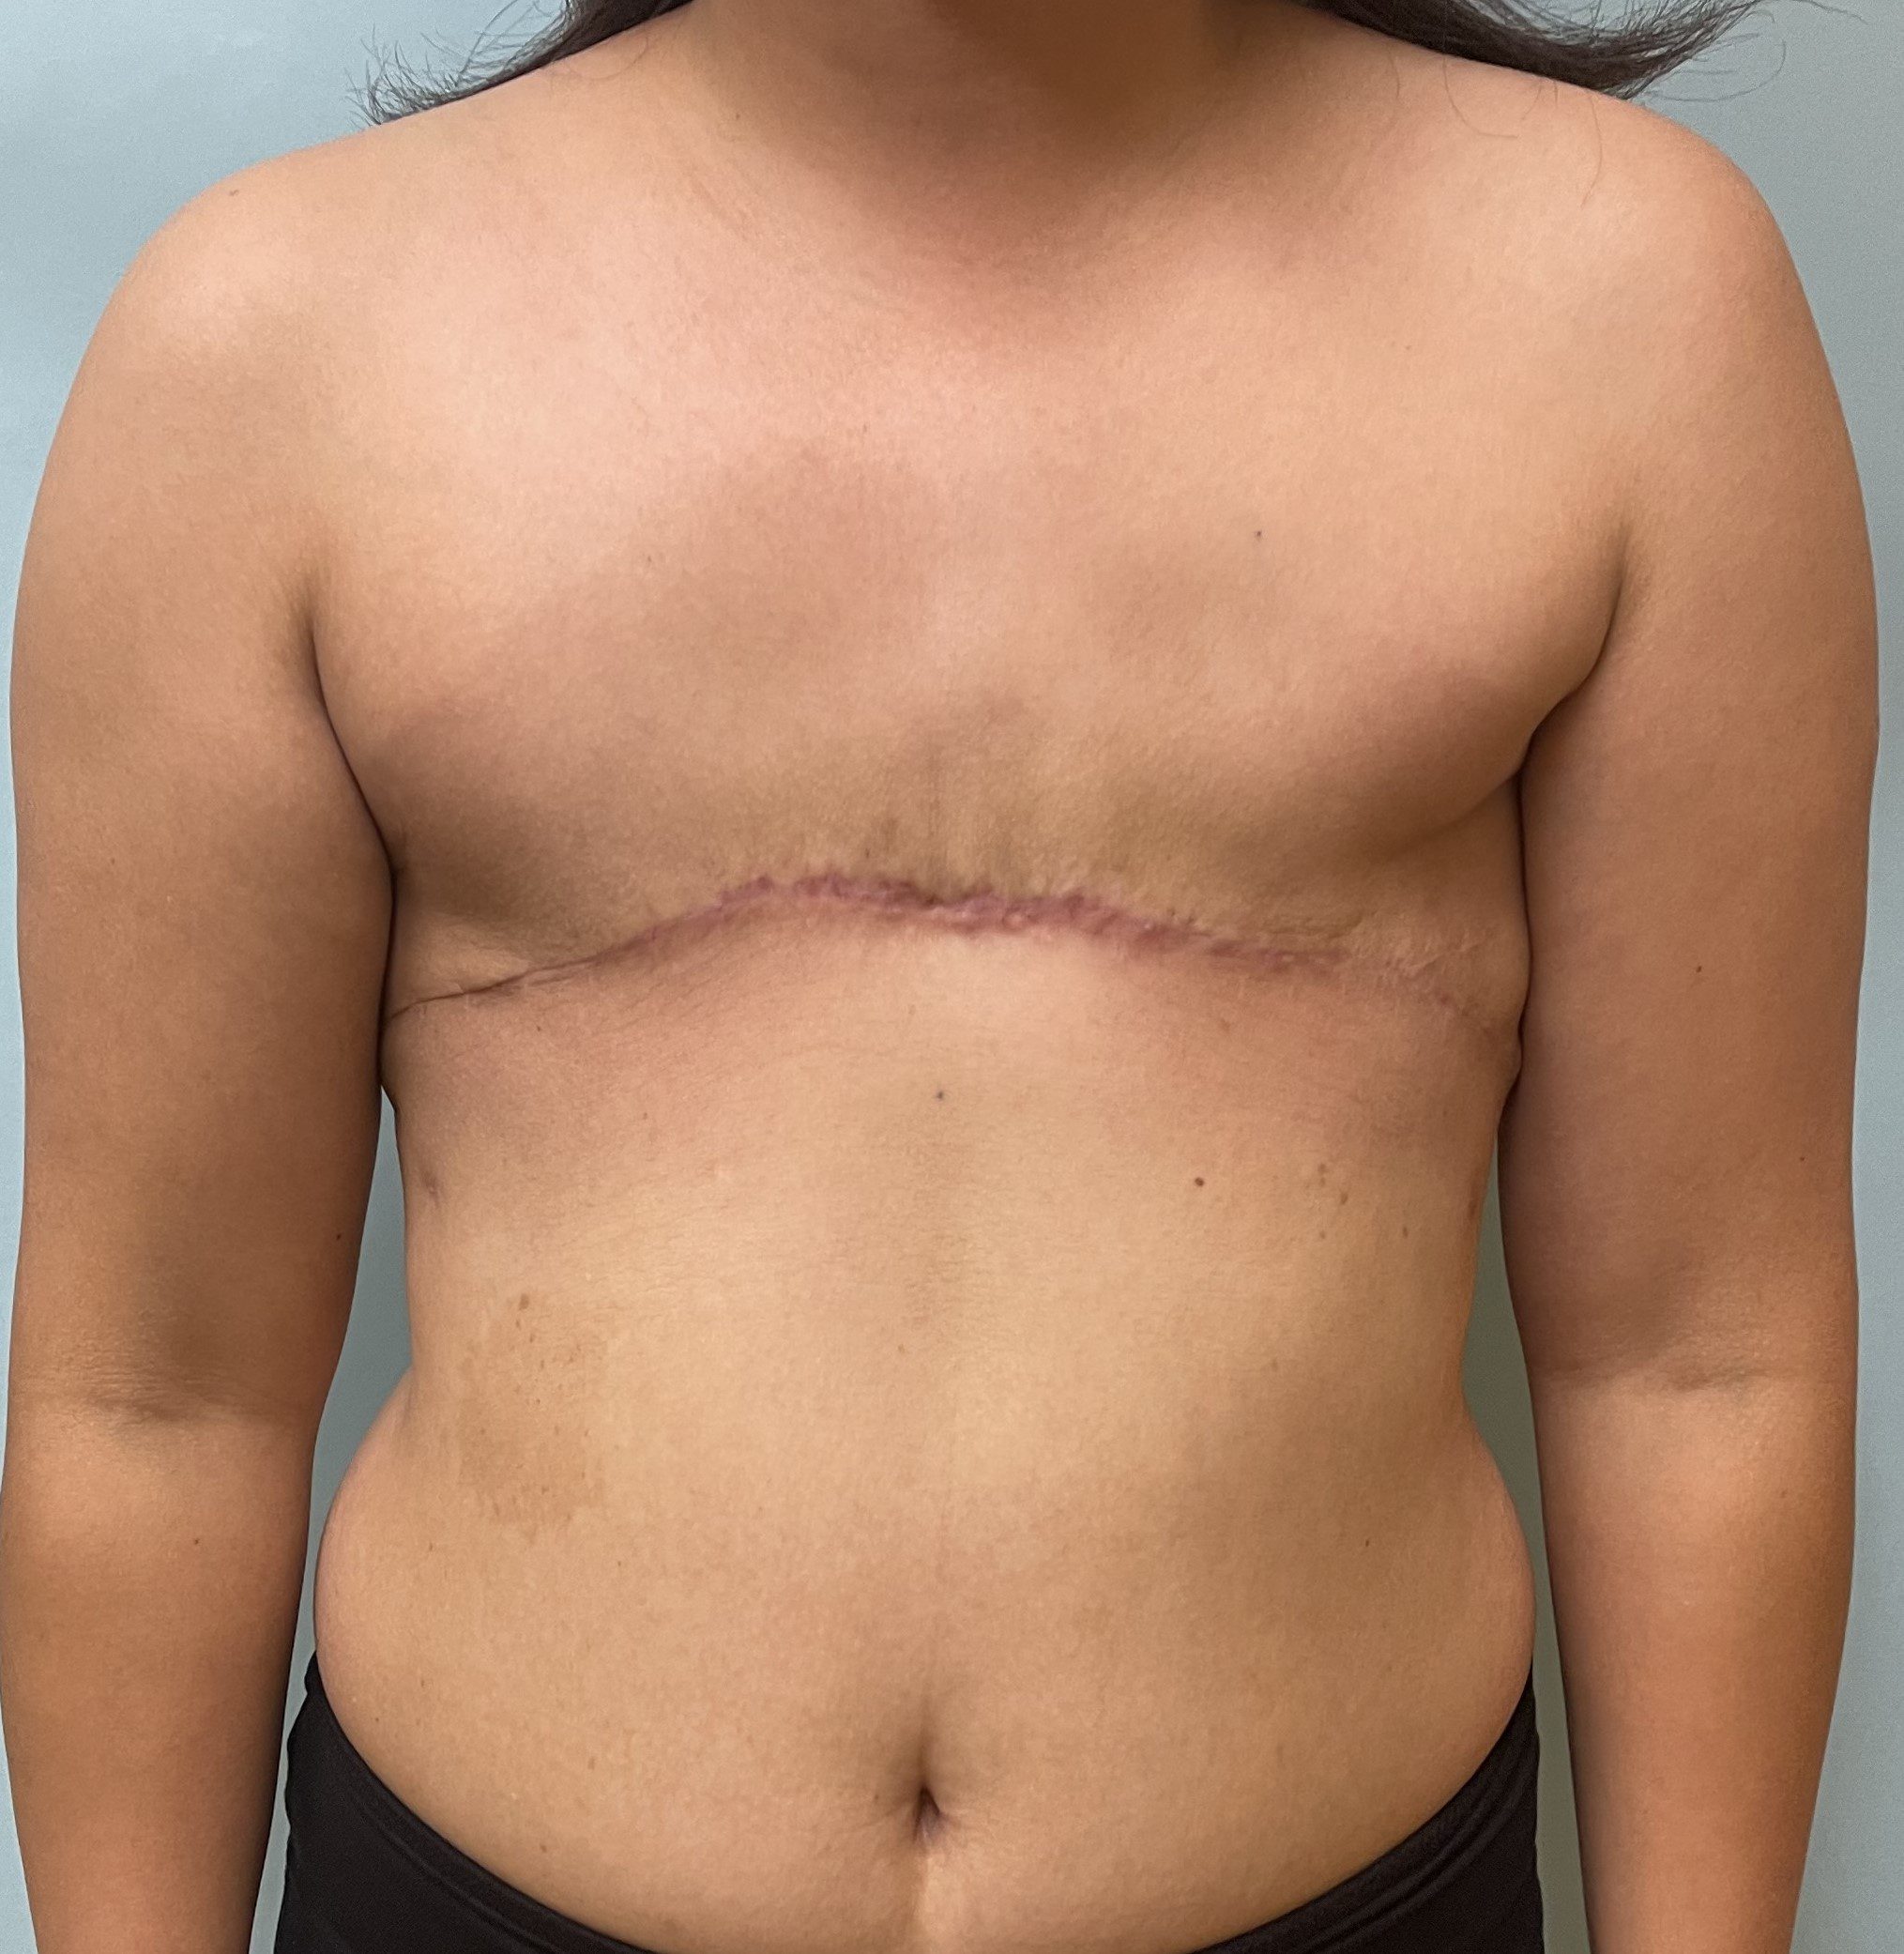 mastectomy photos without reconstruction - bilateral